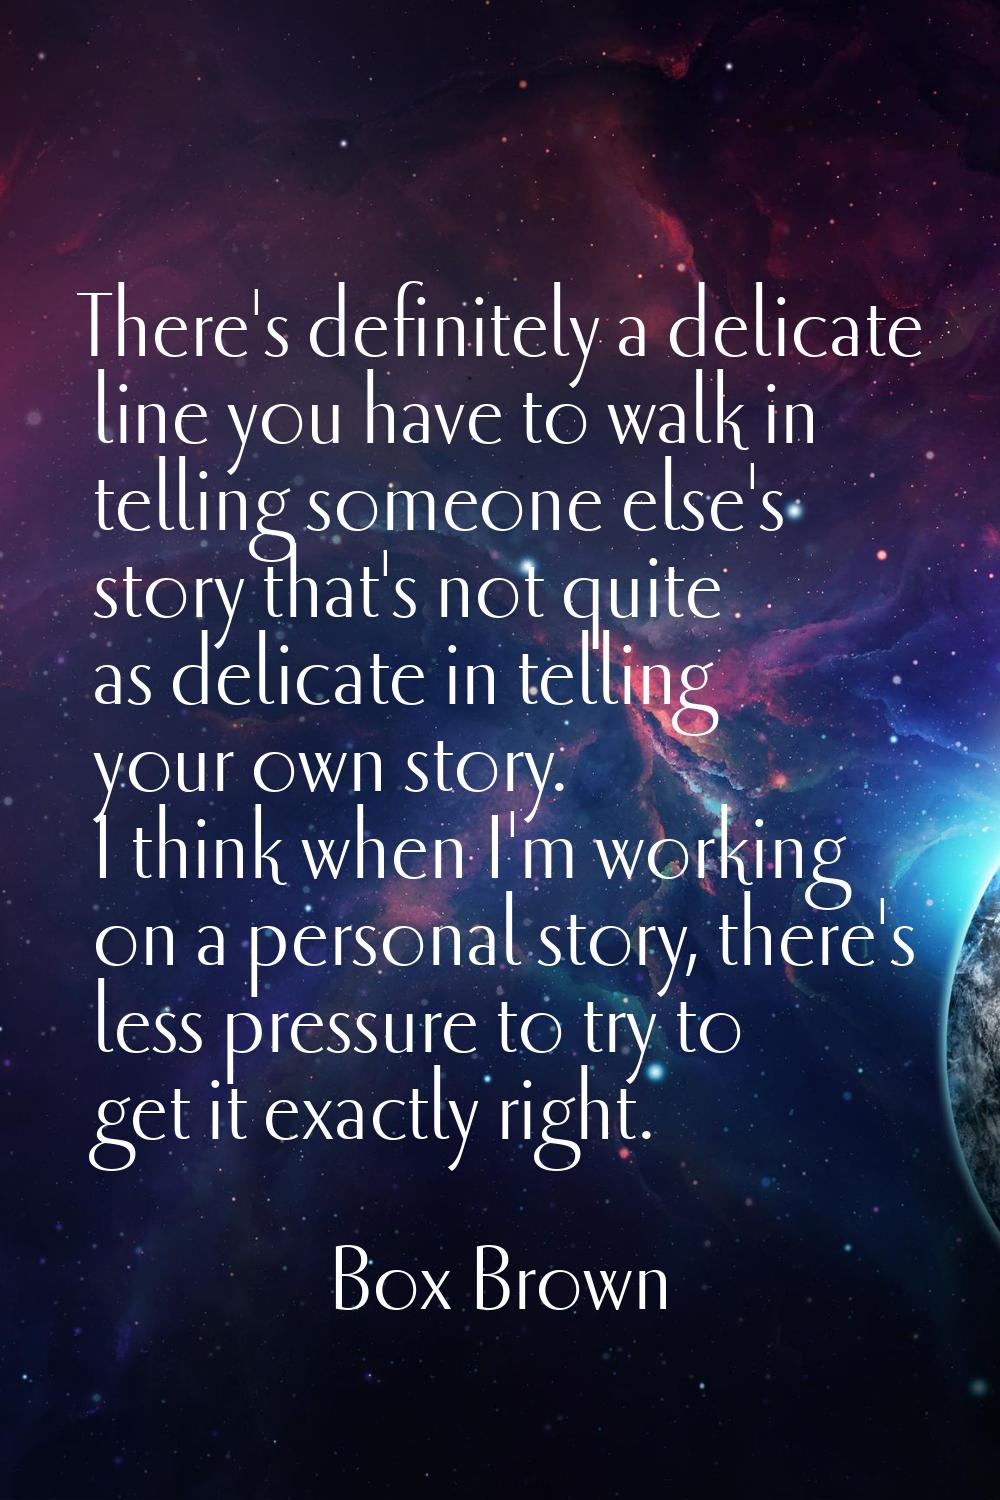 There's definitely a delicate line you have to walk in telling someone else's story that's not quit